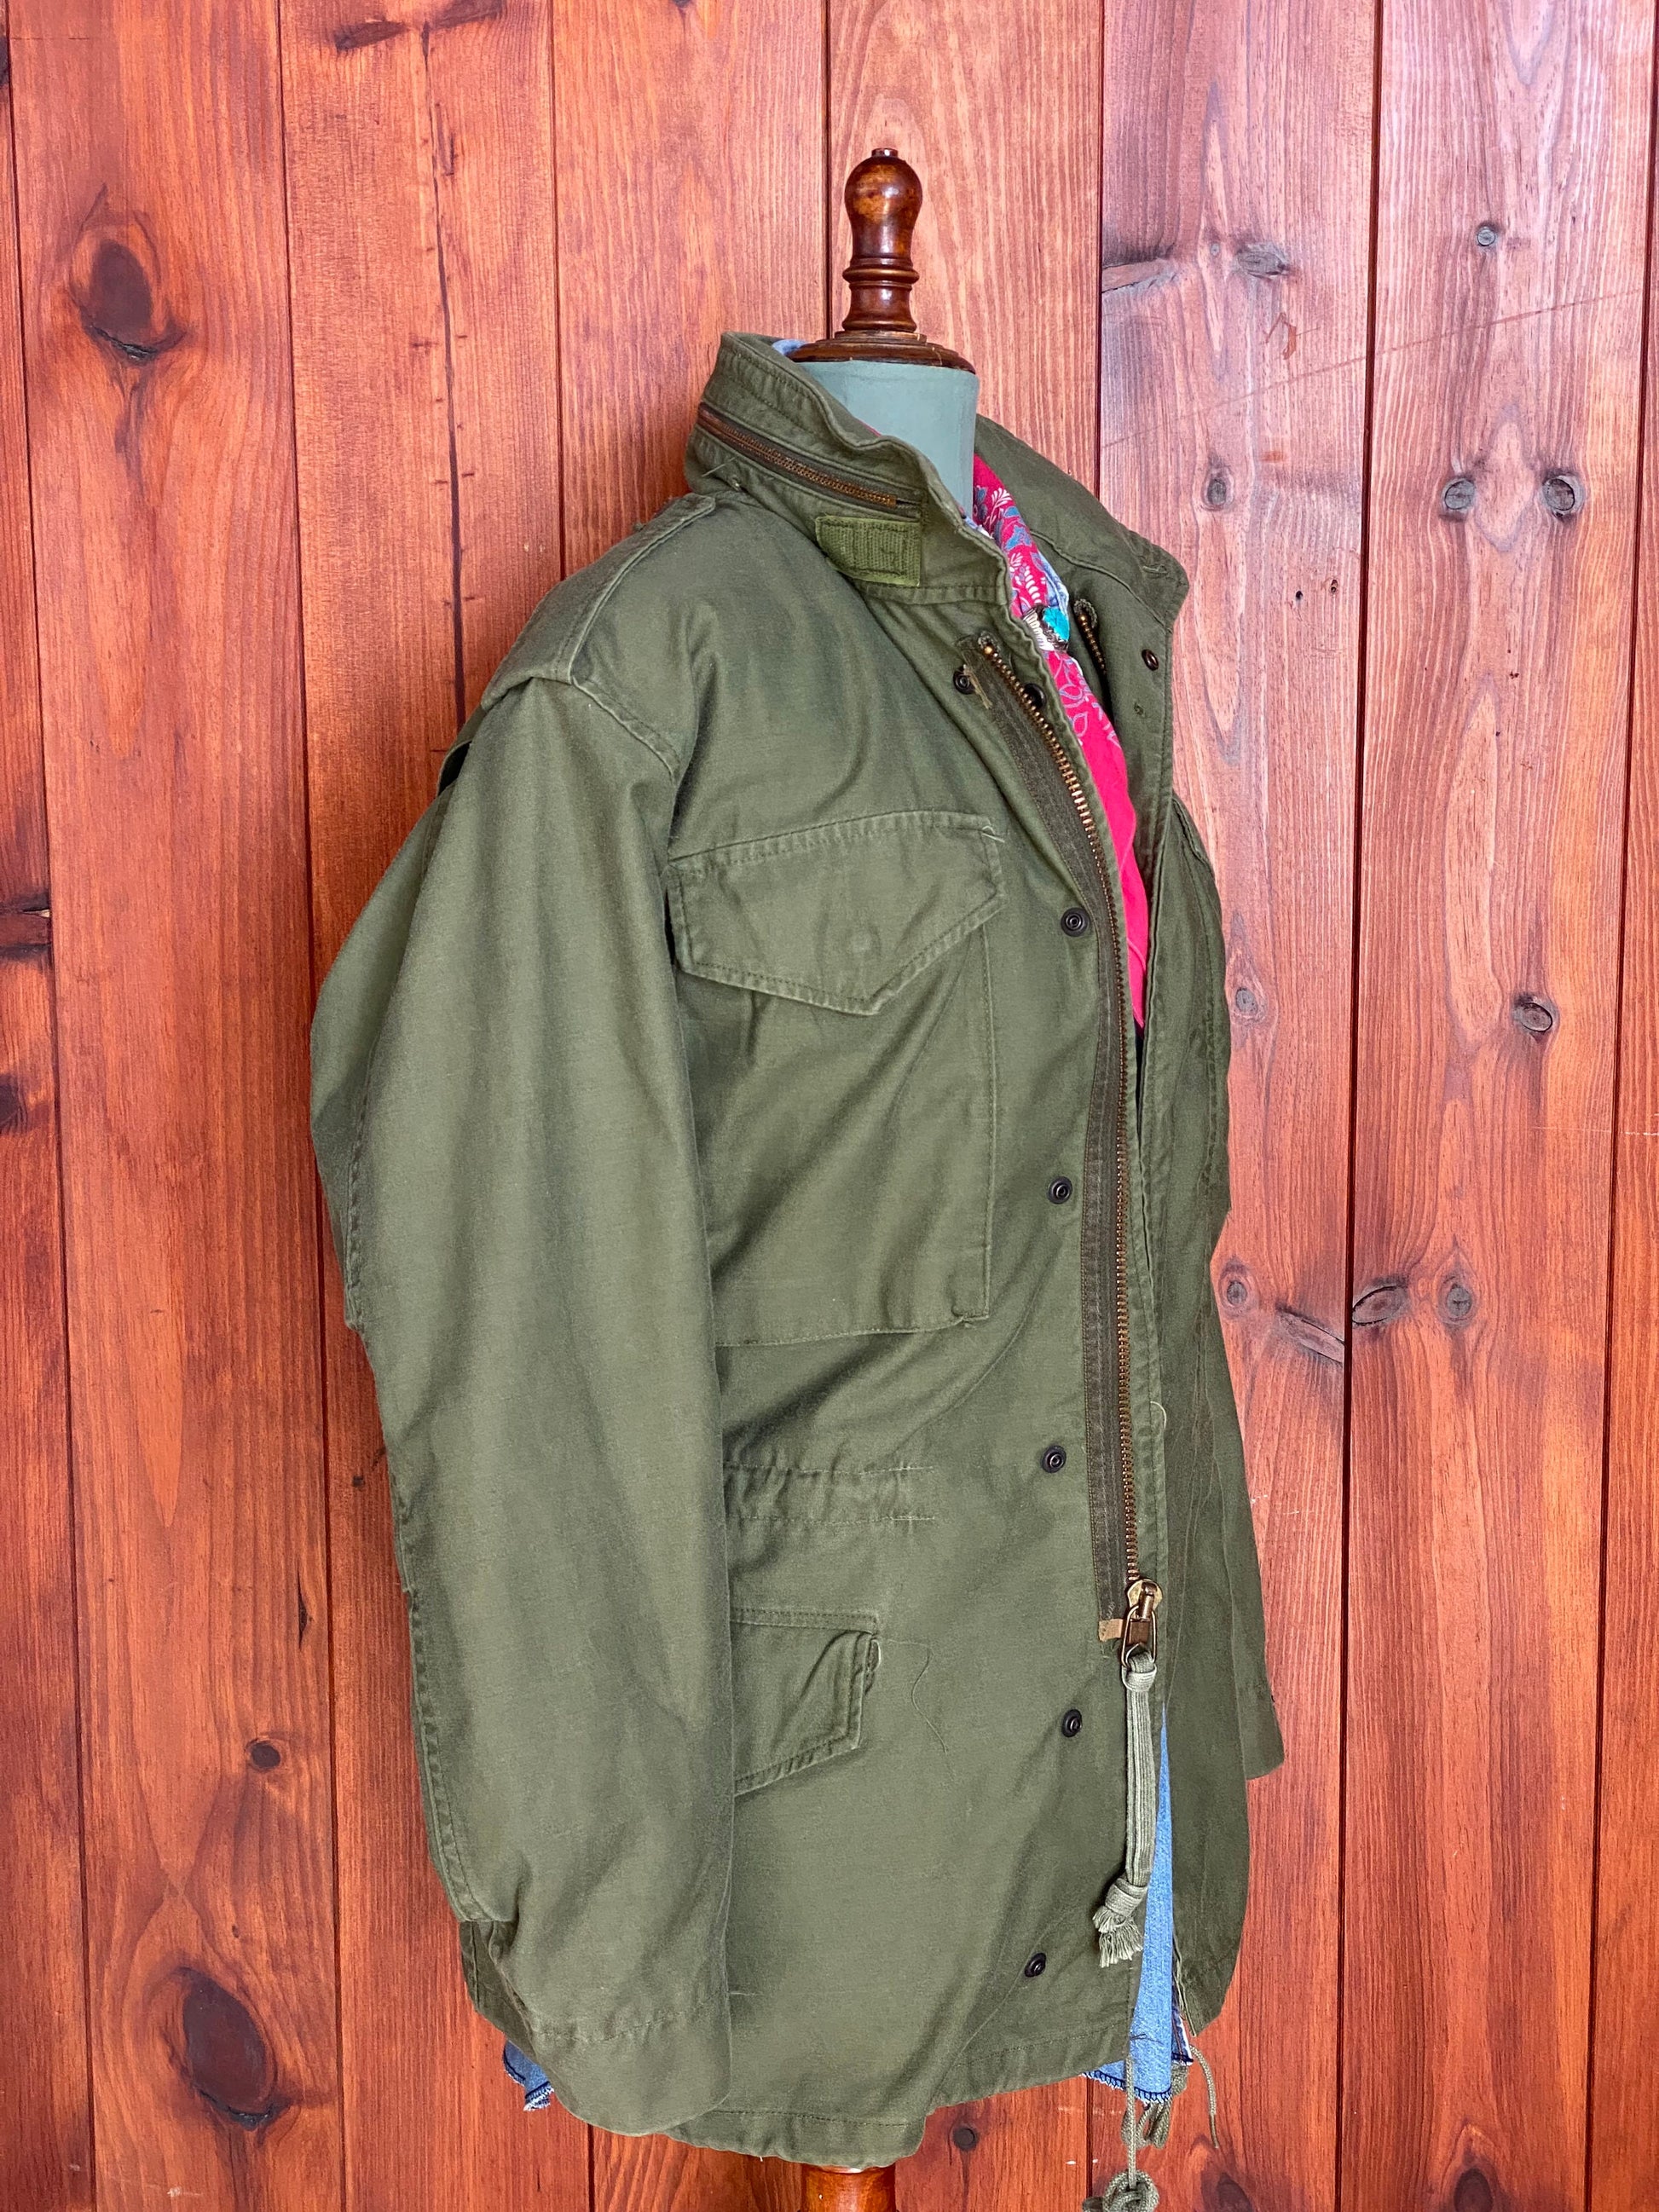 Original US Military 1981 Vintage M-65 Field Jacket | Classic Olive Green Military Apparel with Timeless Style and Durability